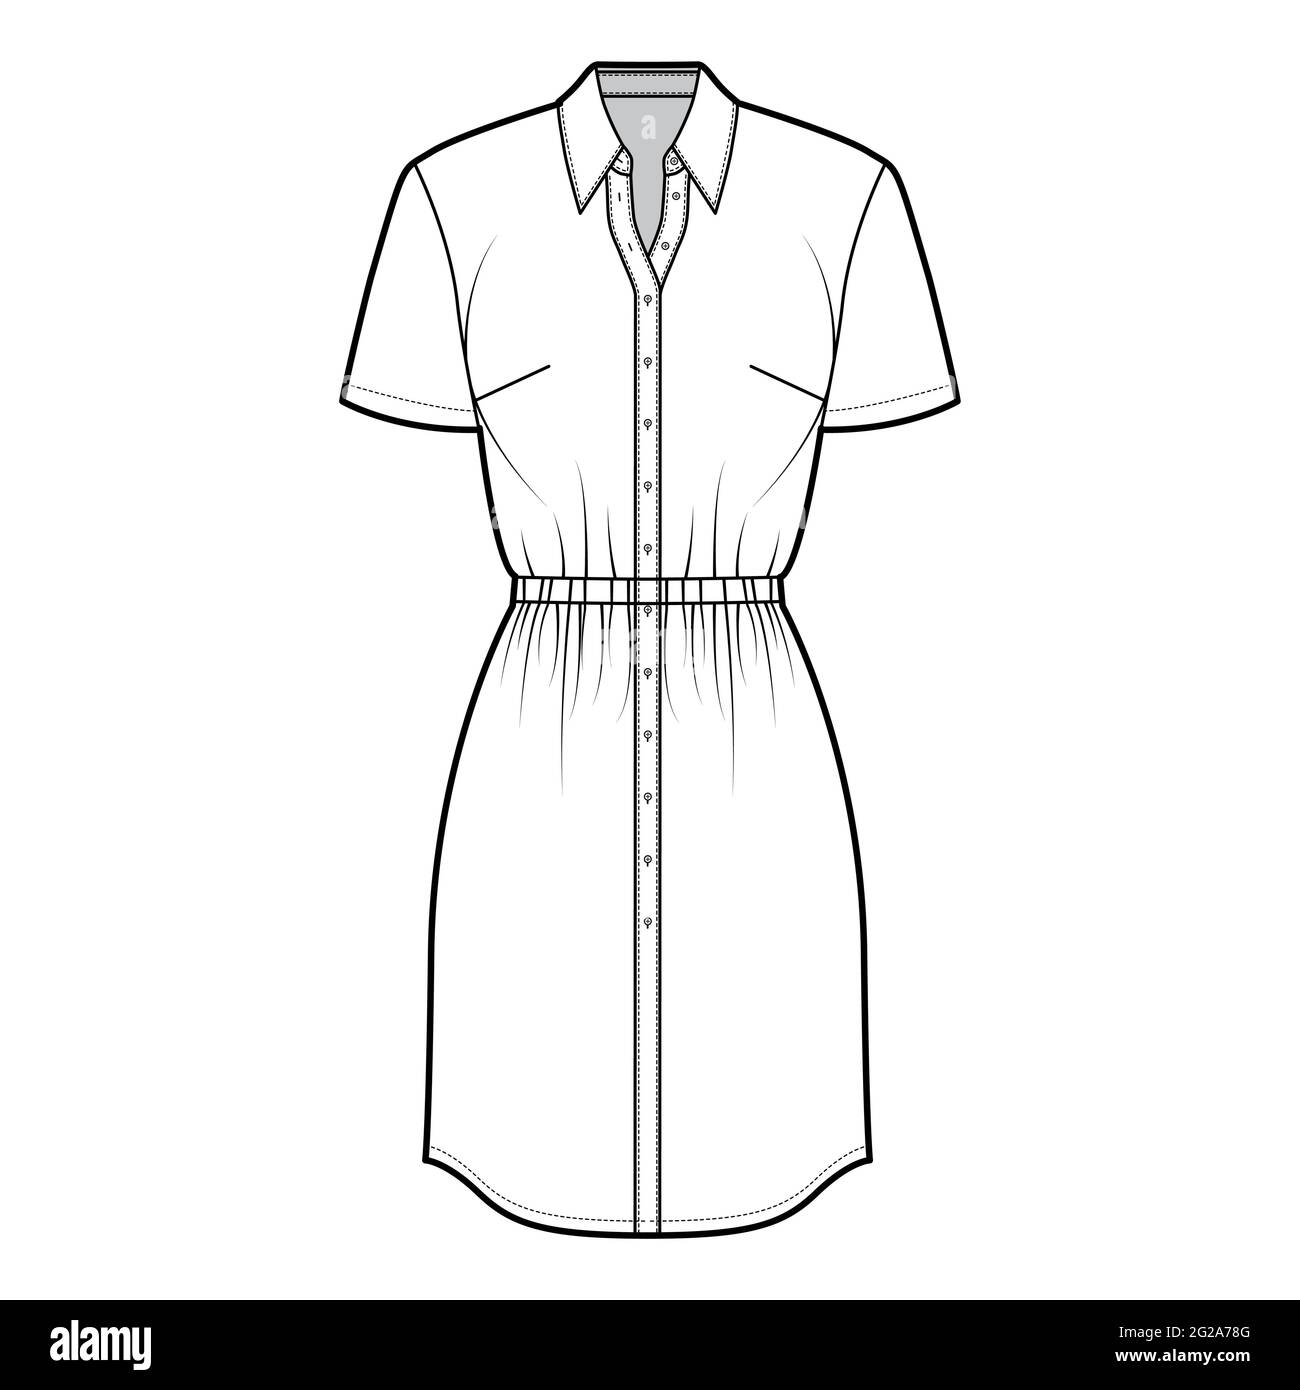 Dress shirt technical fashion illustration with gathered waist, short sleeves,, knee length pencil skirt, classic collar, button closure. Flat apparel front, white color. Women, men unisex CAD mockup Stock Vector